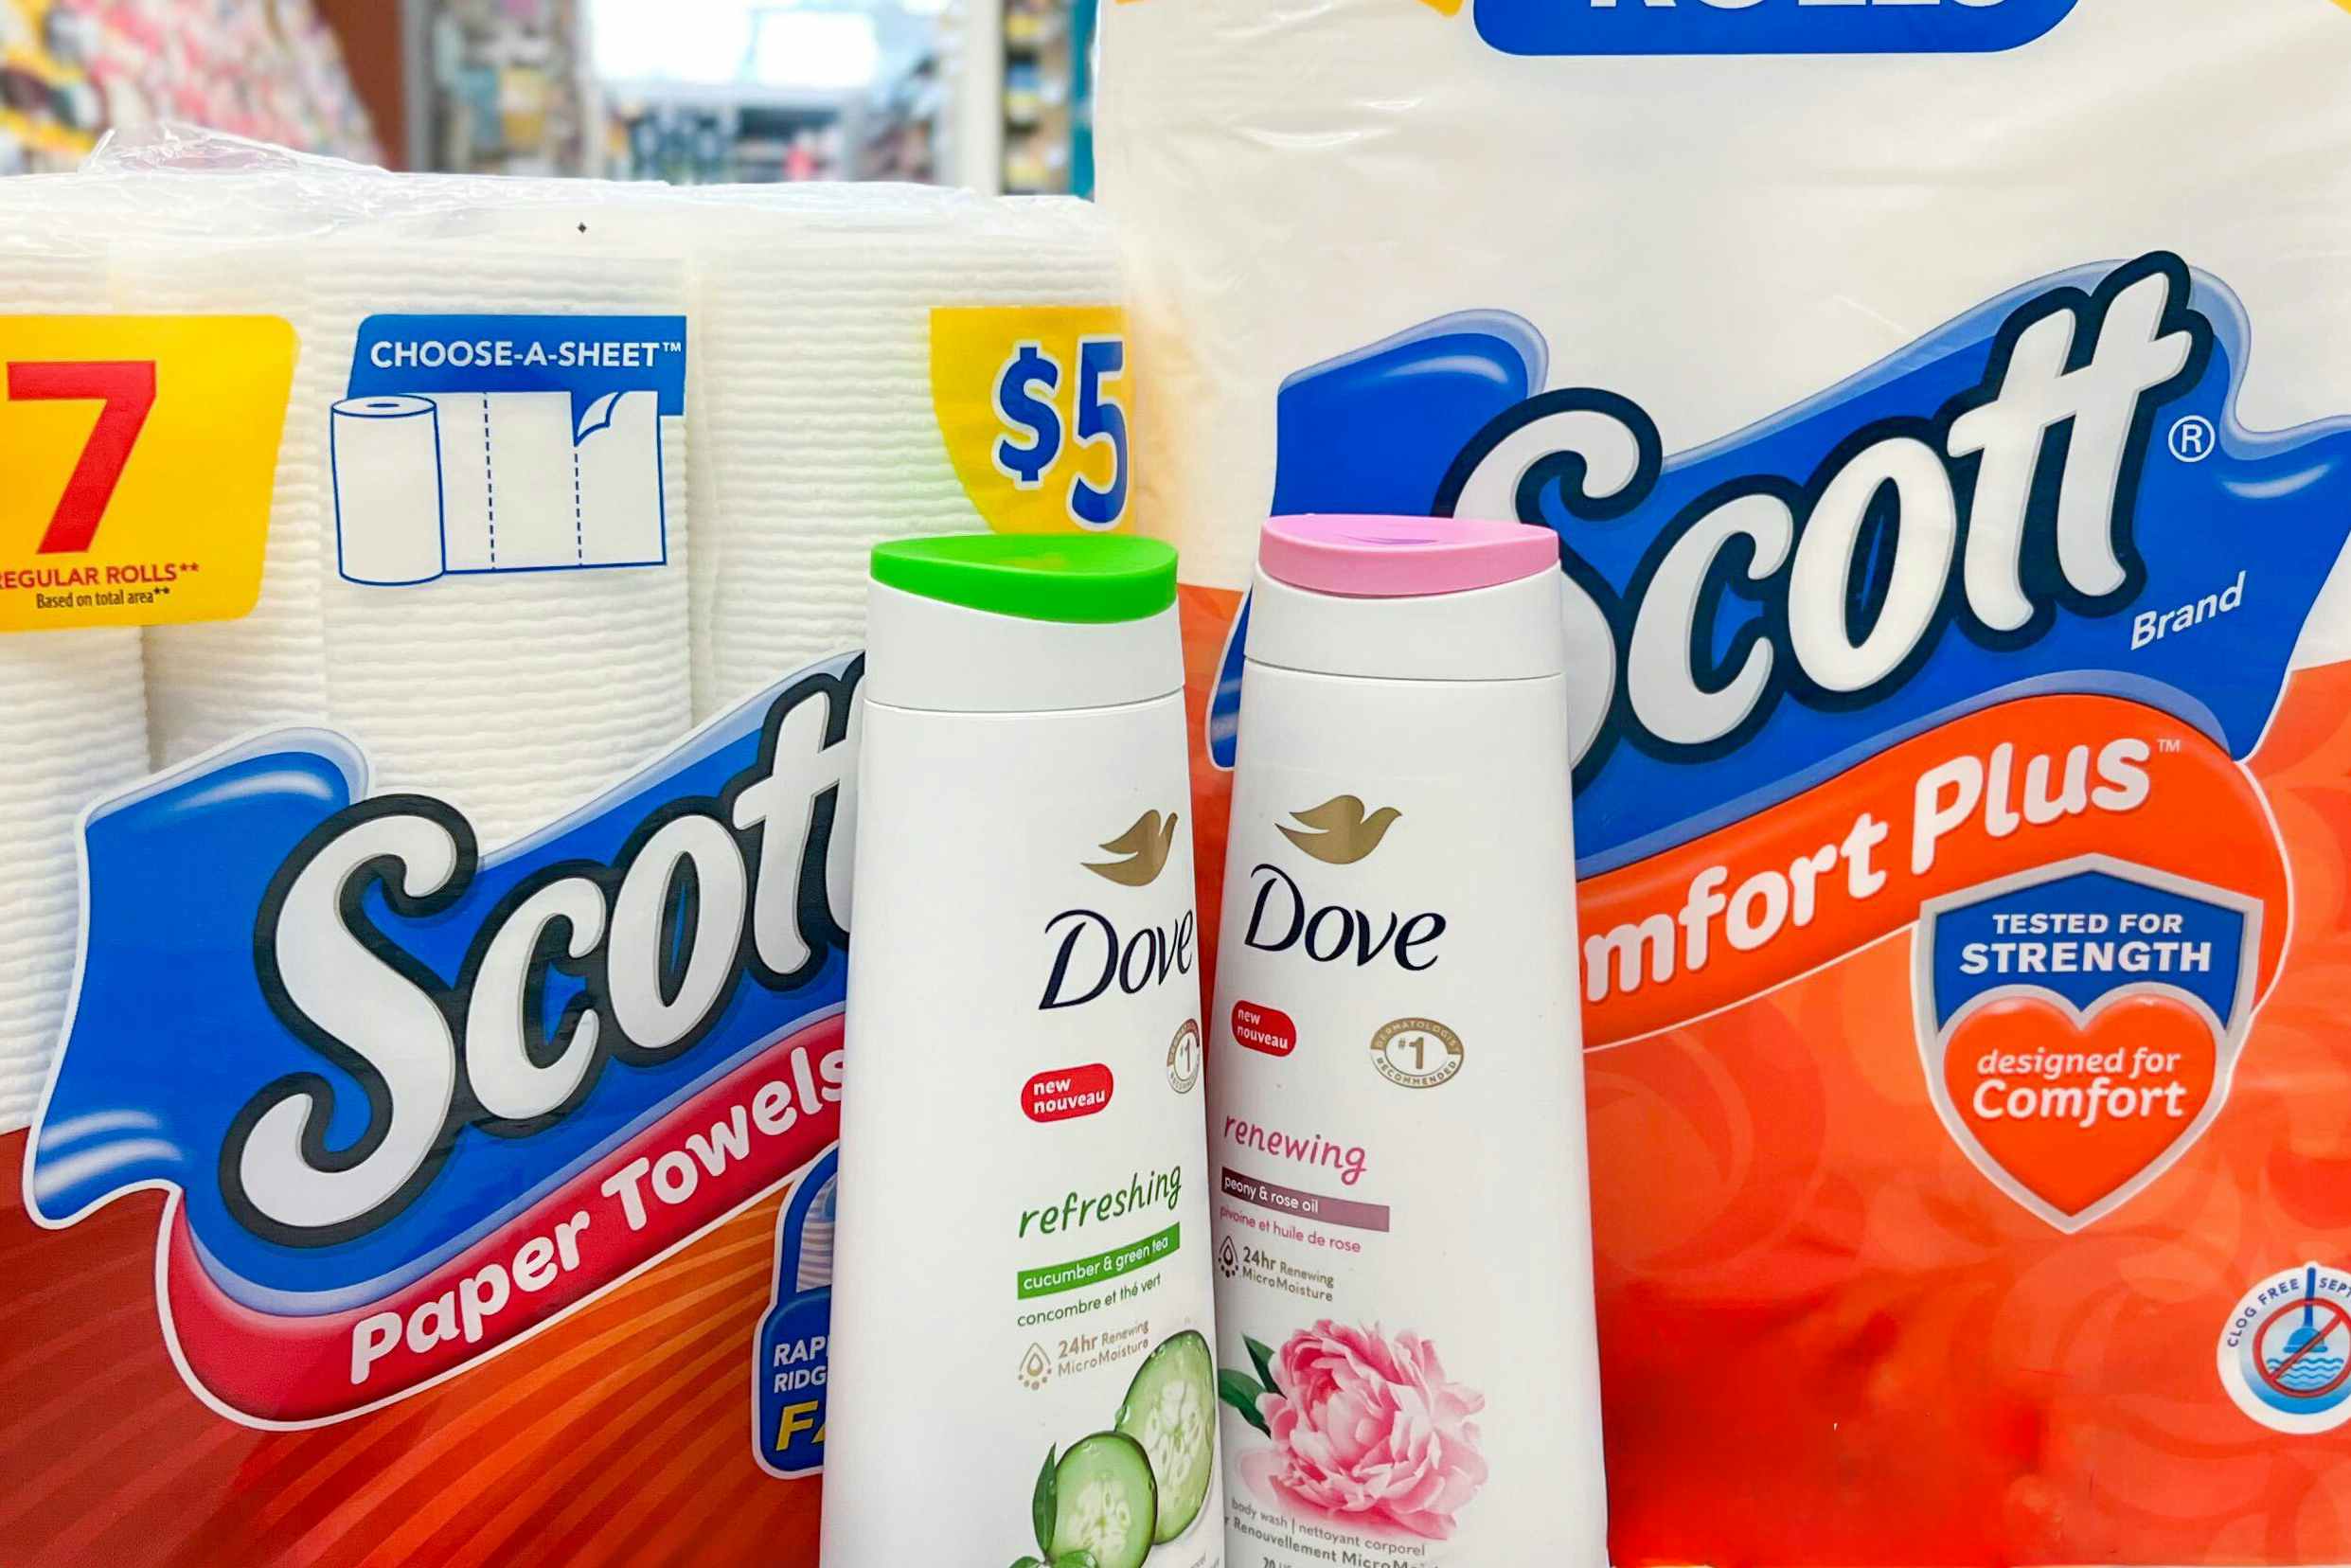 some Dove body wash and Scott paper products at Walgreens